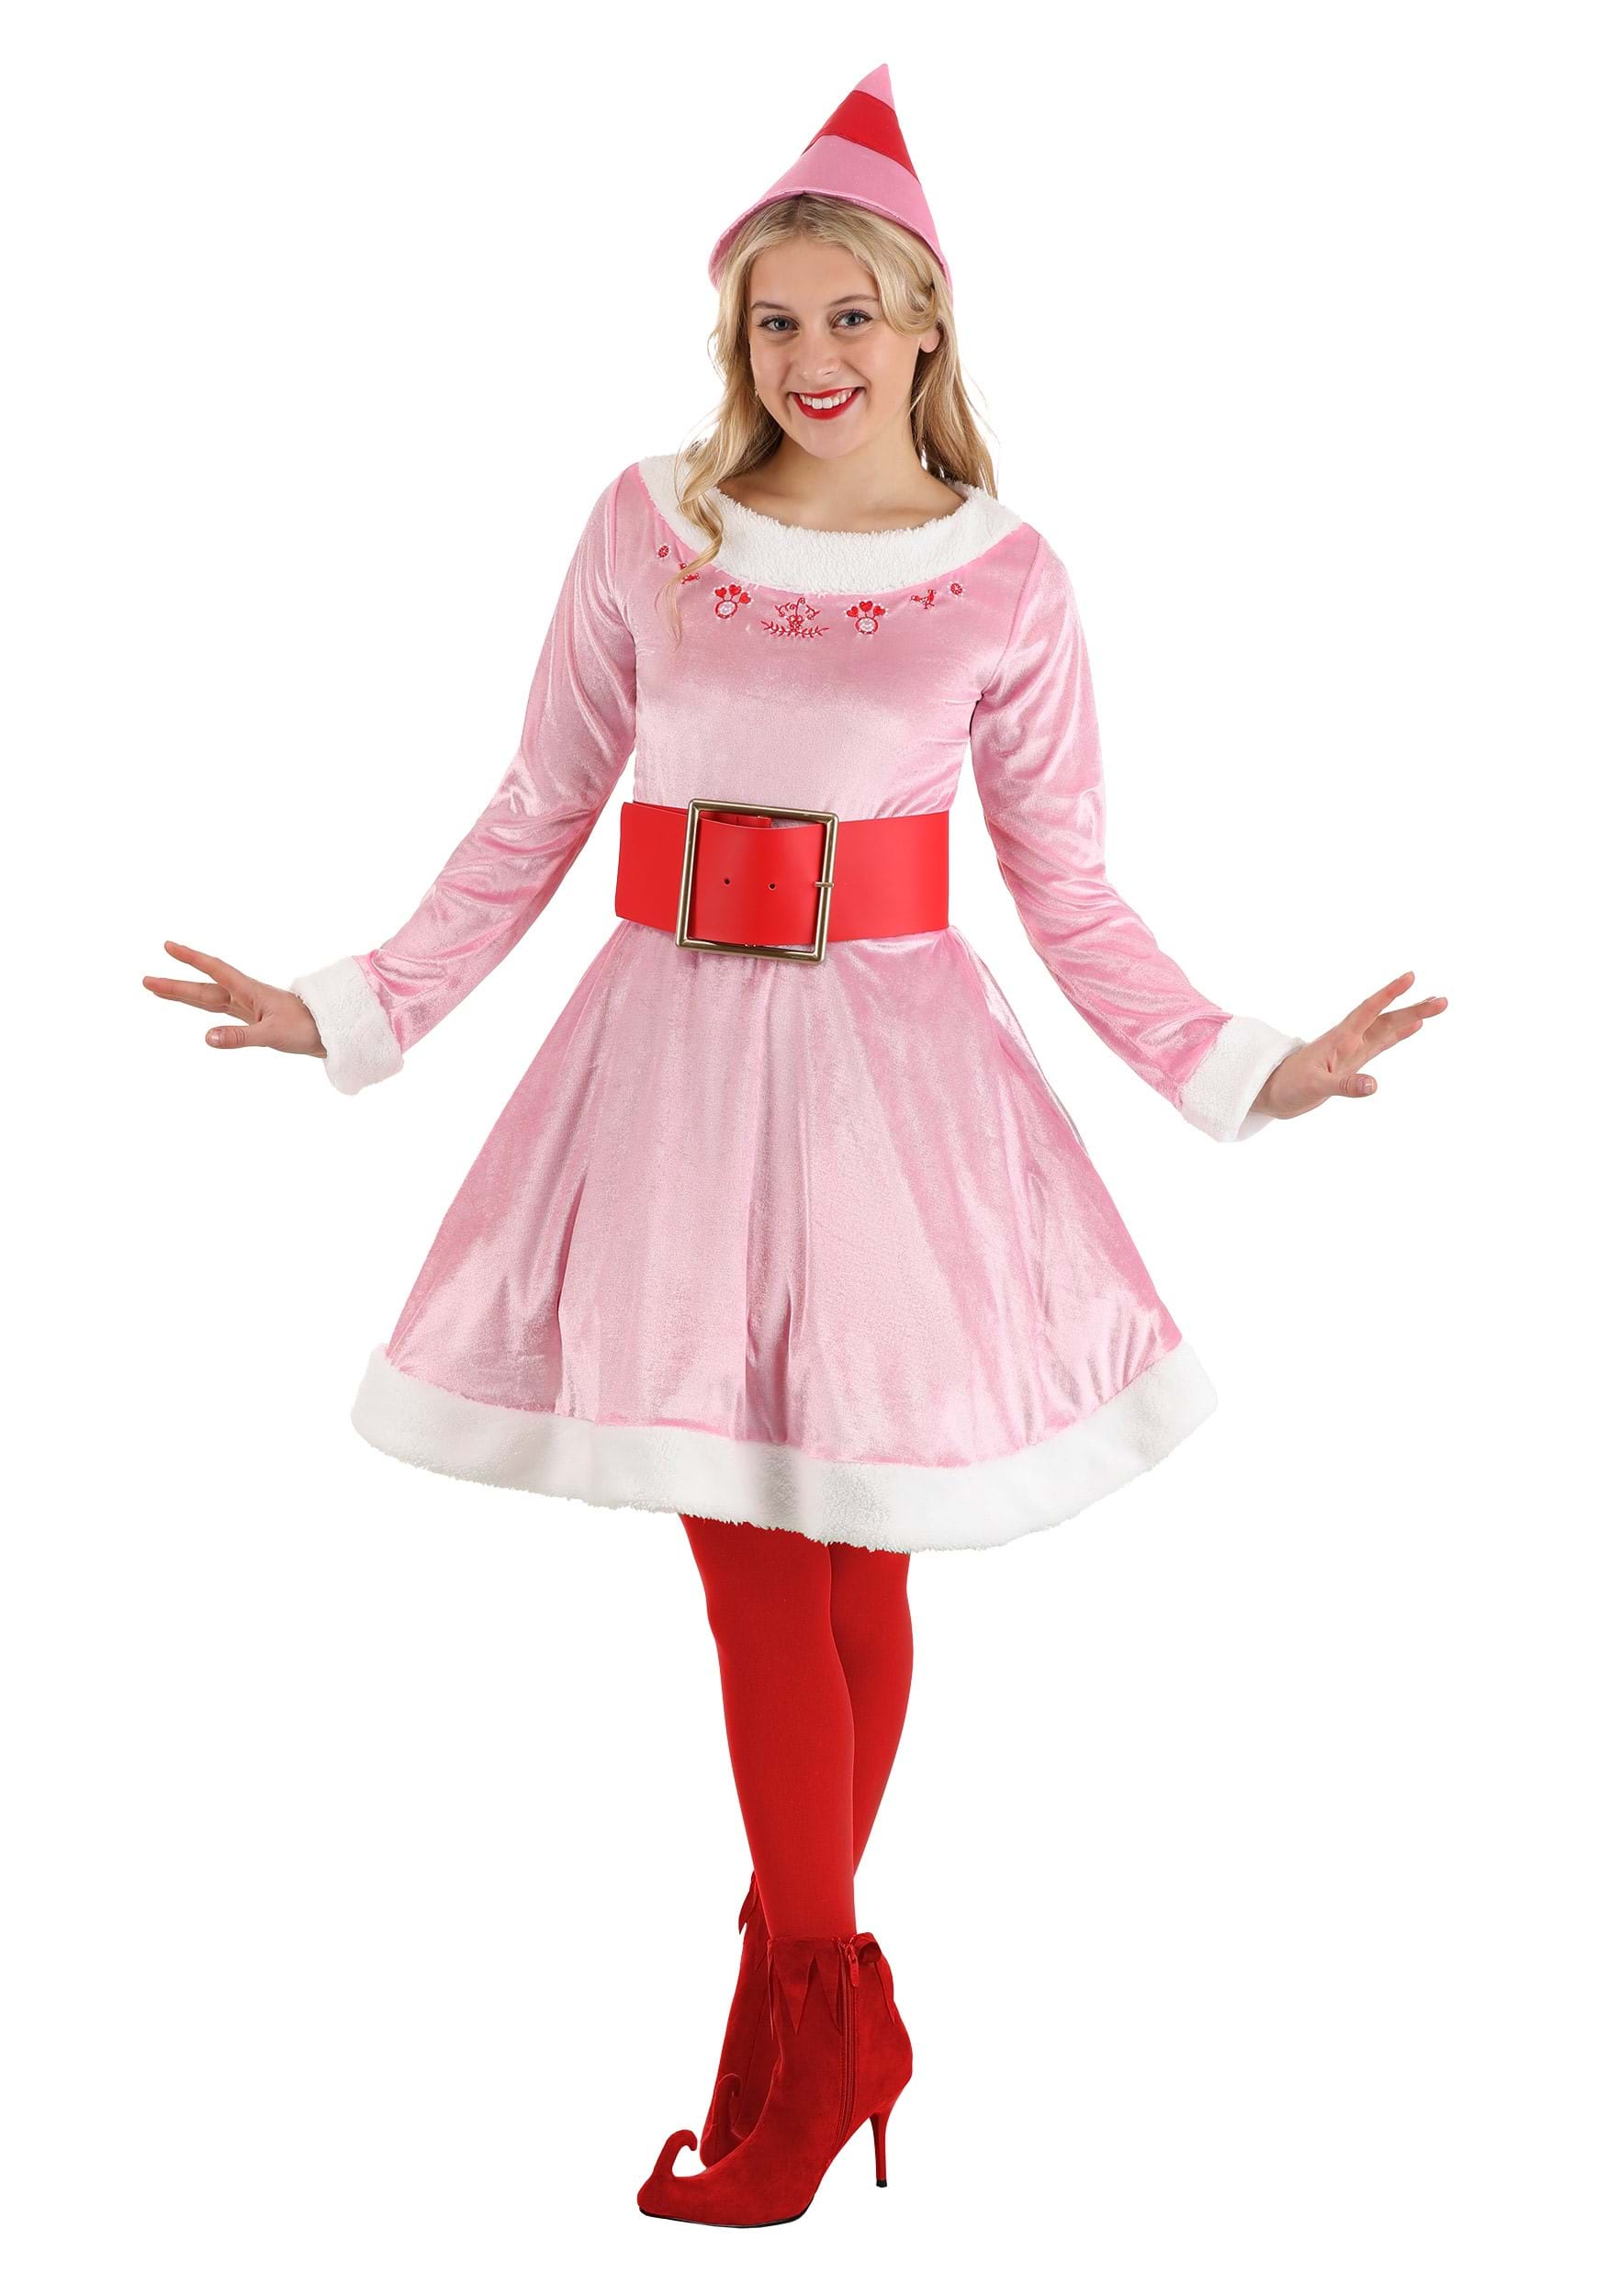 Photos - Fancy Dress ELF Jerry Leigh Women's Pink  Jovie Costume Pink/Red/White 